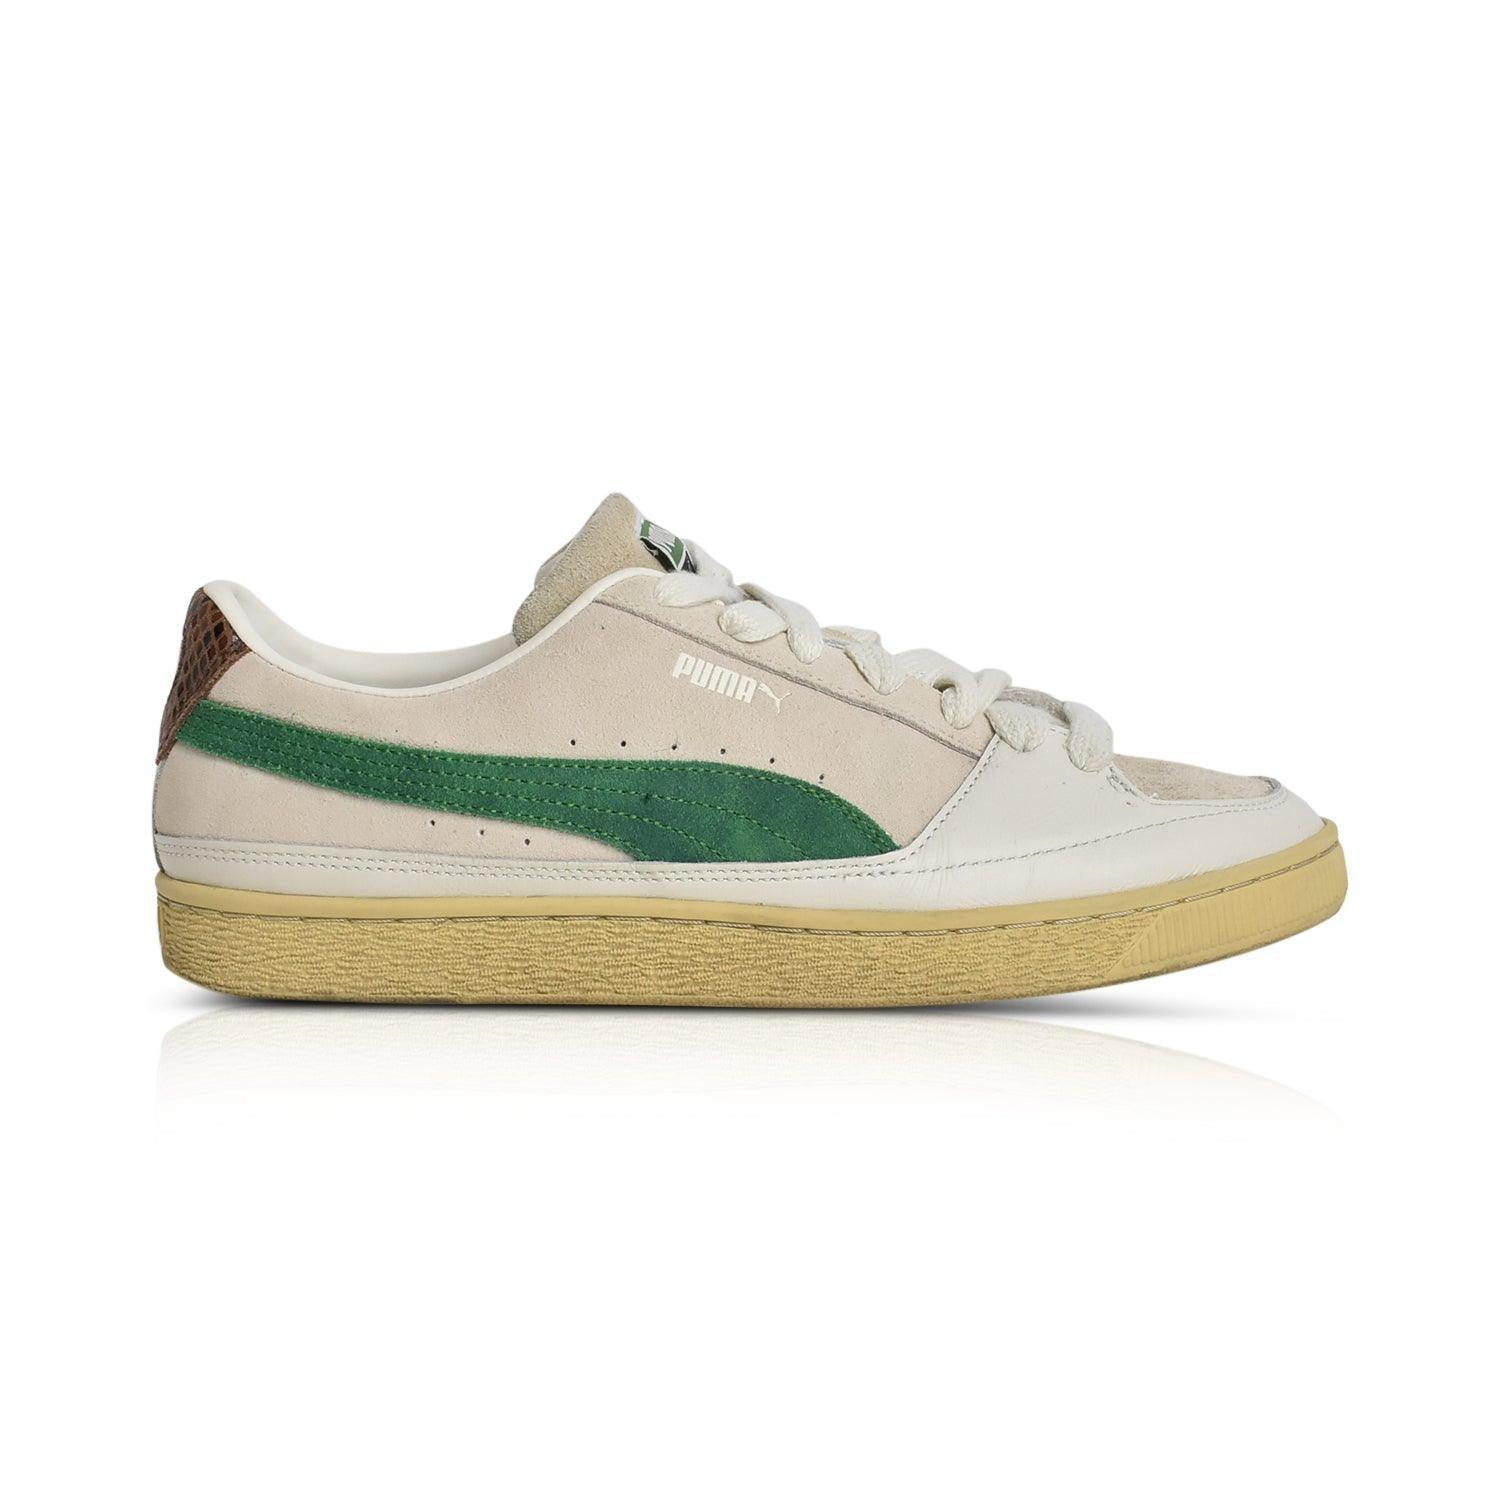 Puma x Rhude Sneakers - Men's 10 - Fashionably Yours